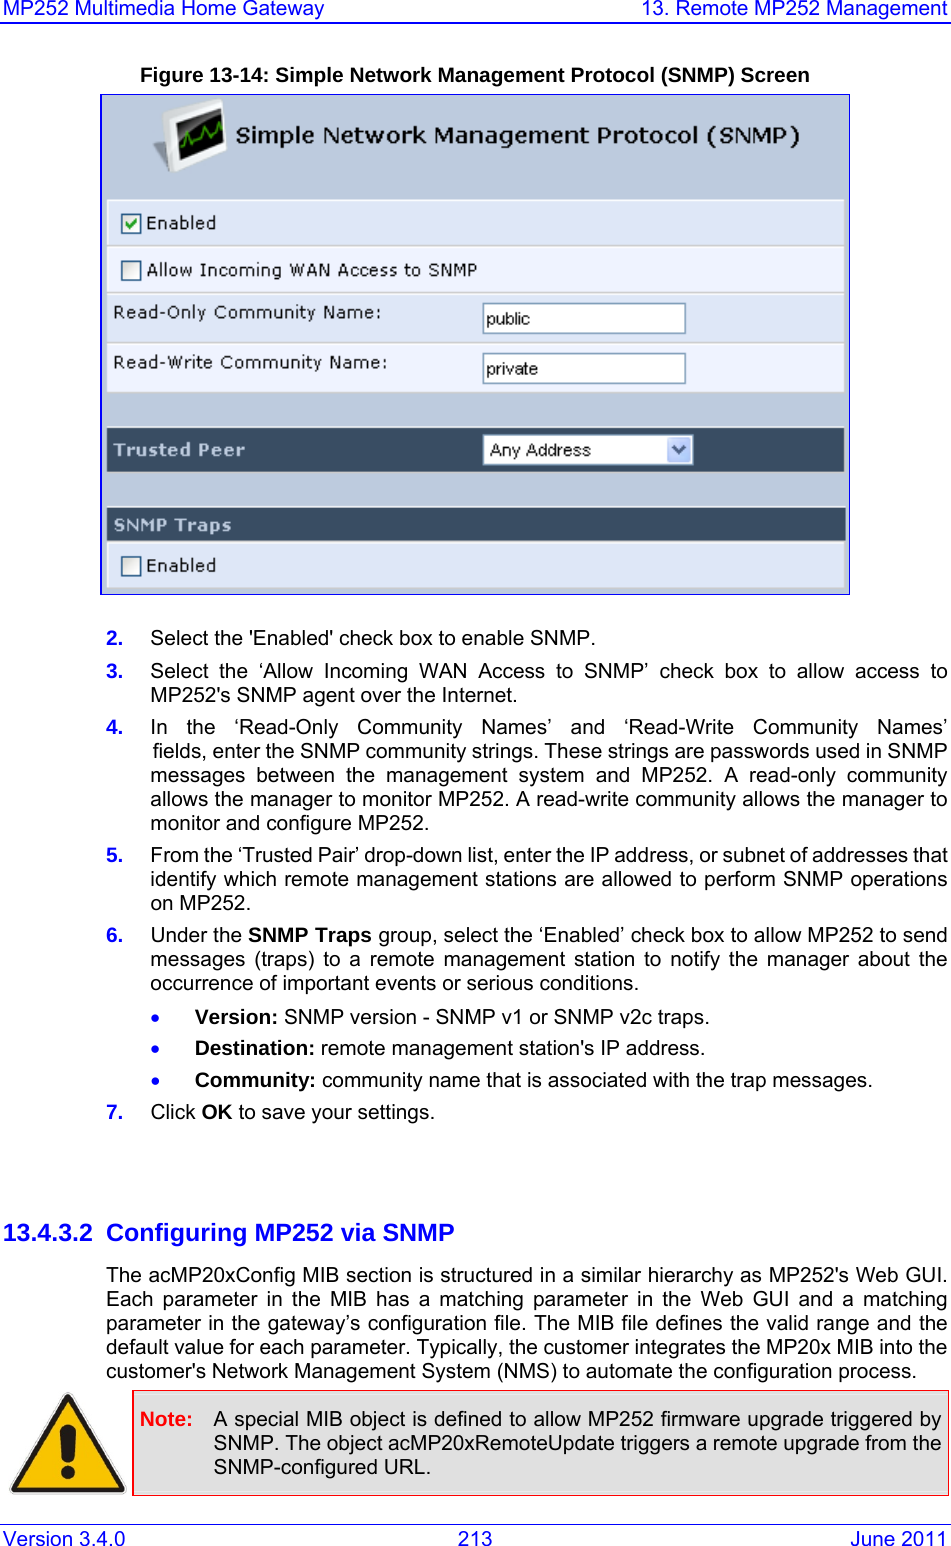 MP252 Multimedia Home Gateway  13. Remote MP252 Management Version 3.4.0  213  June 2011 Figure 13-14: Simple Network Management Protocol (SNMP) Screen   2.  Select the &apos;Enabled&apos; check box to enable SNMP. 3.  Select the ‘Allow Incoming WAN Access to SNMP’ check box to allow access to MP252&apos;s SNMP agent over the Internet. 4.  In the ‘Read-Only Community Names’ and ‘Read-Write Community Names’    fields, enter the SNMP community strings. These strings are passwords used in SNMP messages between the management system and MP252. A read-only community allows the manager to monitor MP252. A read-write community allows the manager to monitor and configure MP252. 5.  From the ‘Trusted Pair’ drop-down list, enter the IP address, or subnet of addresses that identify which remote management stations are allowed to perform SNMP operations on MP252. 6.  Under the SNMP Traps group, select the ‘Enabled’ check box to allow MP252 to send messages (traps) to a remote management station to notify the manager about the occurrence of important events or serious conditions.   • Version: SNMP version - SNMP v1 or SNMP v2c traps. • Destination: remote management station&apos;s IP address. • Community: community name that is associated with the trap messages. 7.  Click OK to save your settings.   13.4.3.2  Configuring MP252 via SNMP The acMP20xConfig MIB section is structured in a similar hierarchy as MP252&apos;s Web GUI. Each parameter in the MIB has a matching parameter in the Web GUI and a matching parameter in the gateway’s configuration file. The MIB file defines the valid range and the default value for each parameter. Typically, the customer integrates the MP20x MIB into the customer&apos;s Network Management System (NMS) to automate the configuration process.  Note:  A special MIB object is defined to allow MP252 firmware upgrade triggered by SNMP. The object acMP20xRemoteUpdate triggers a remote upgrade from the SNMP-configured URL.  